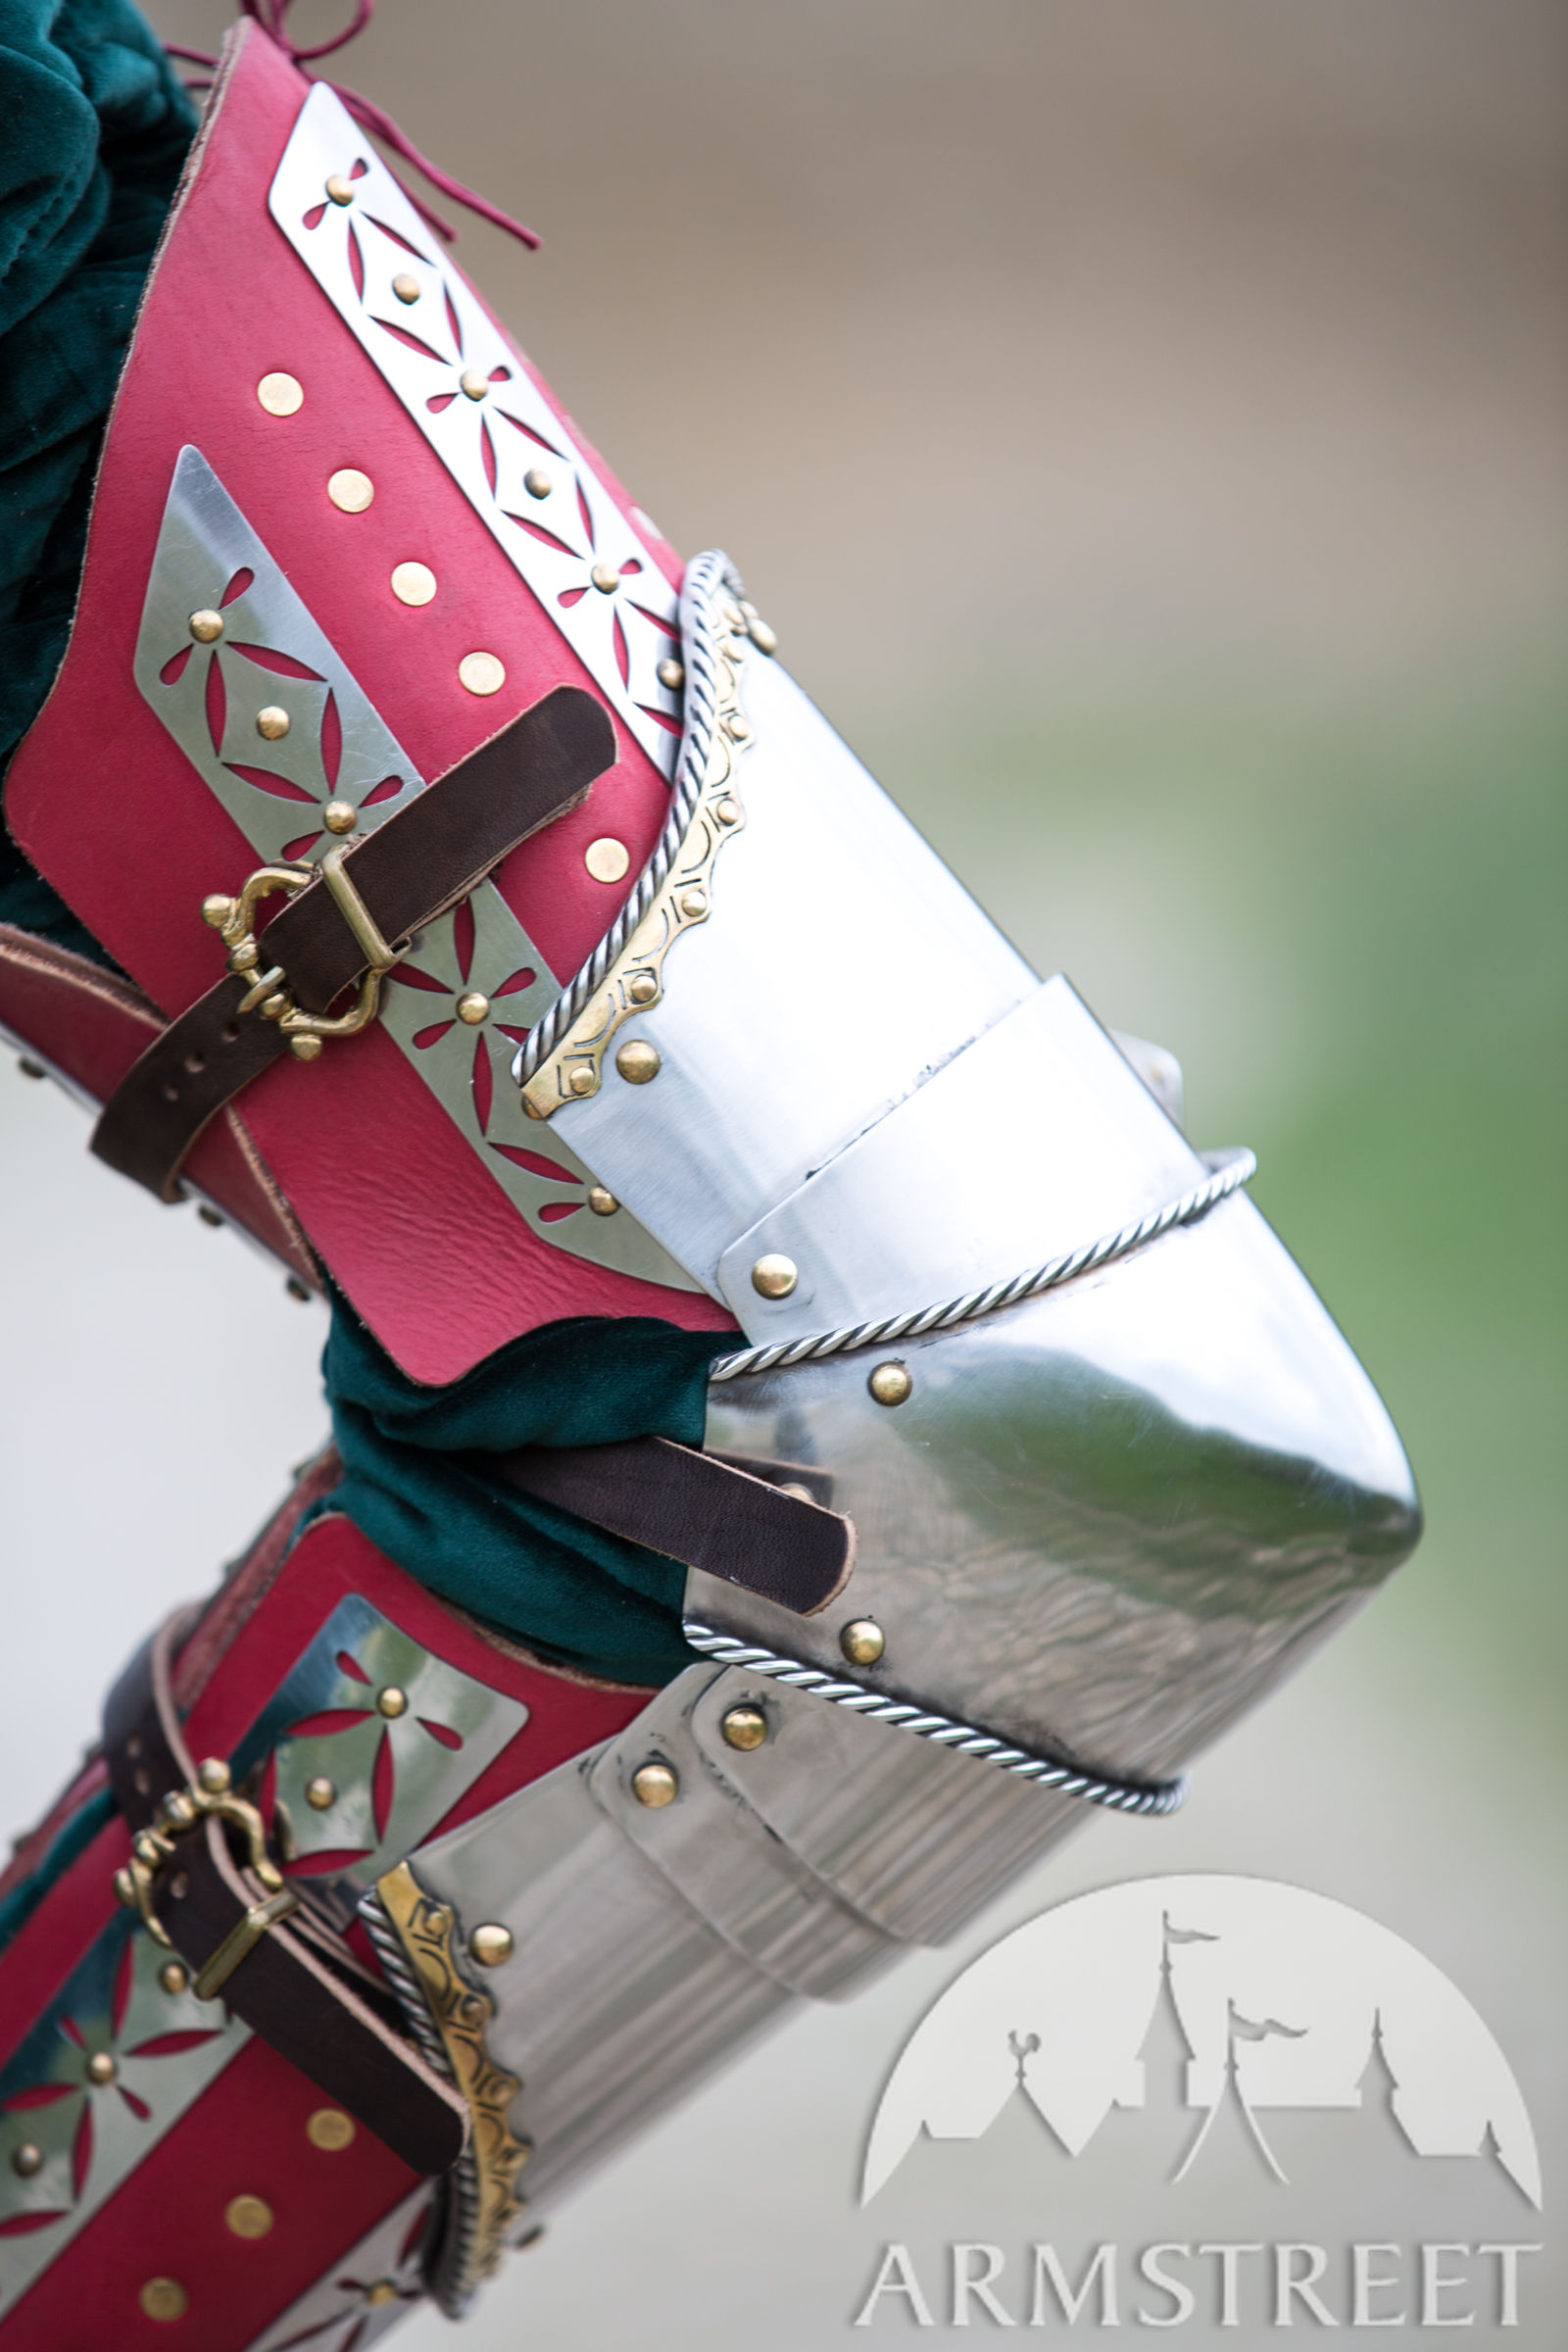 close up of the kingmaker arm armour